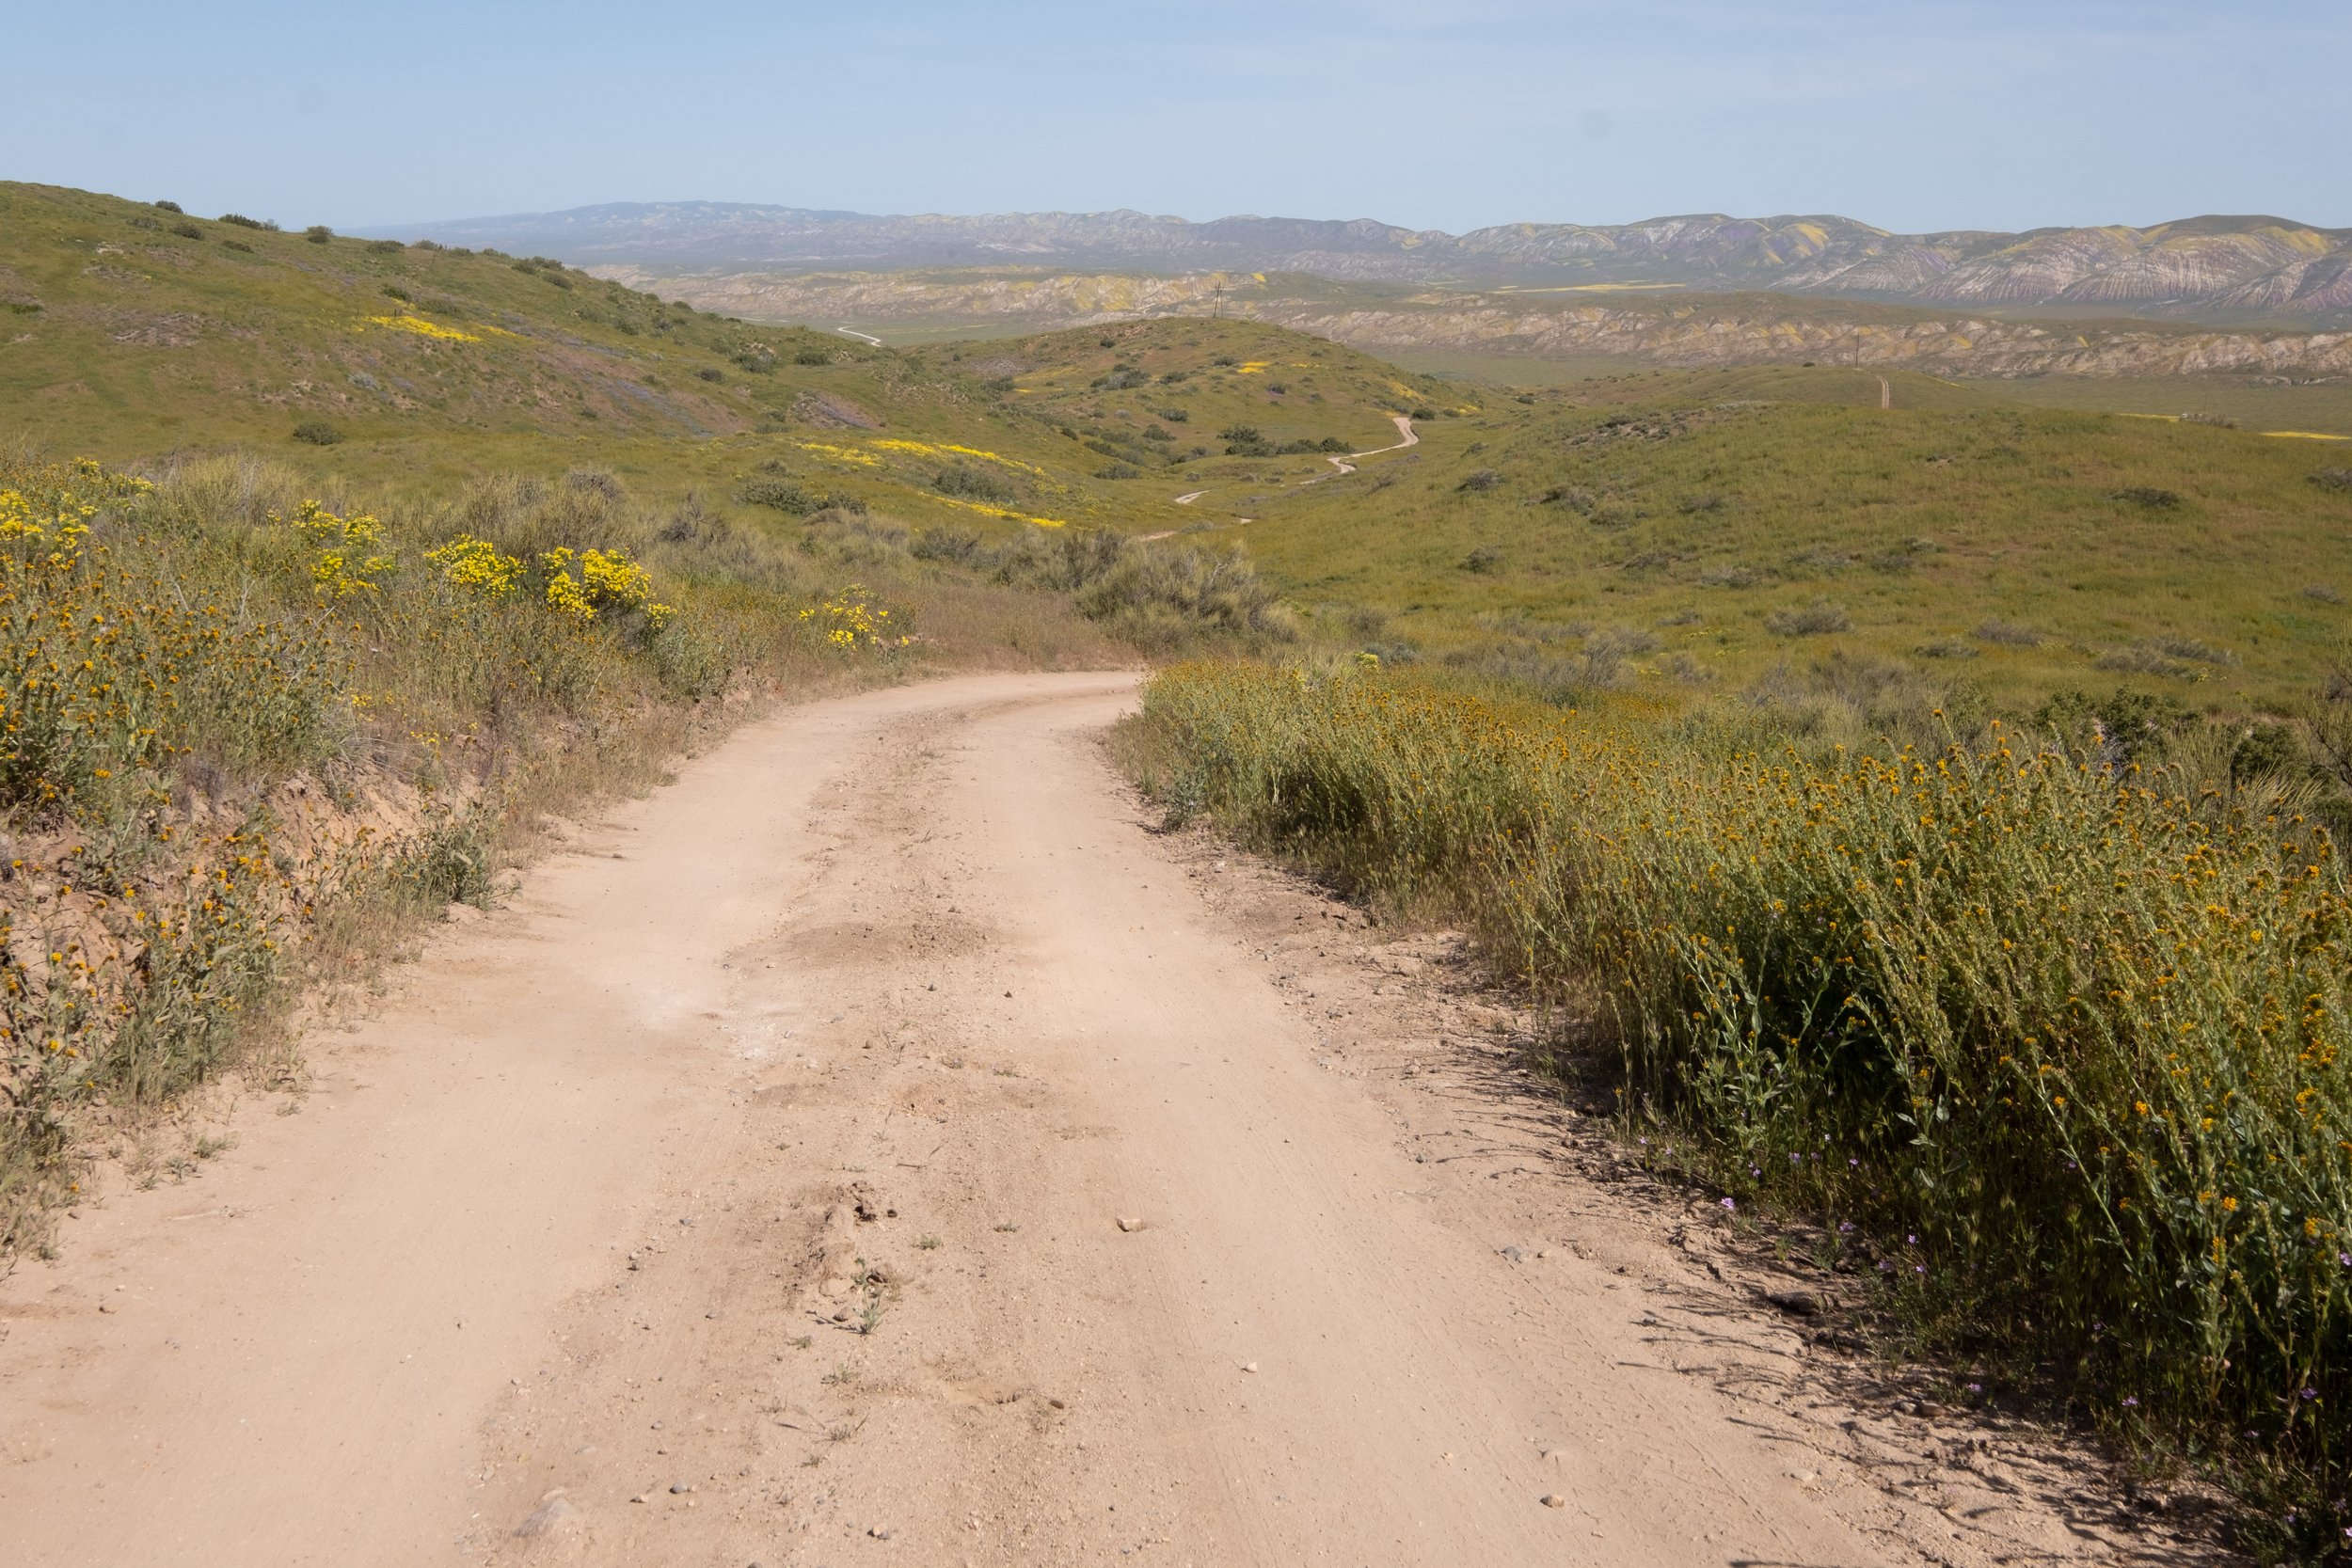  The wildflowers are blooming profusely in Carrizo Plain National Monument in Santa Margarita, Calif. on Monday, April 24th, 2023. Dirt roads lead off the main route and offer side trips to less visited parts of the Monument. (Akemi Rico | The Corsai